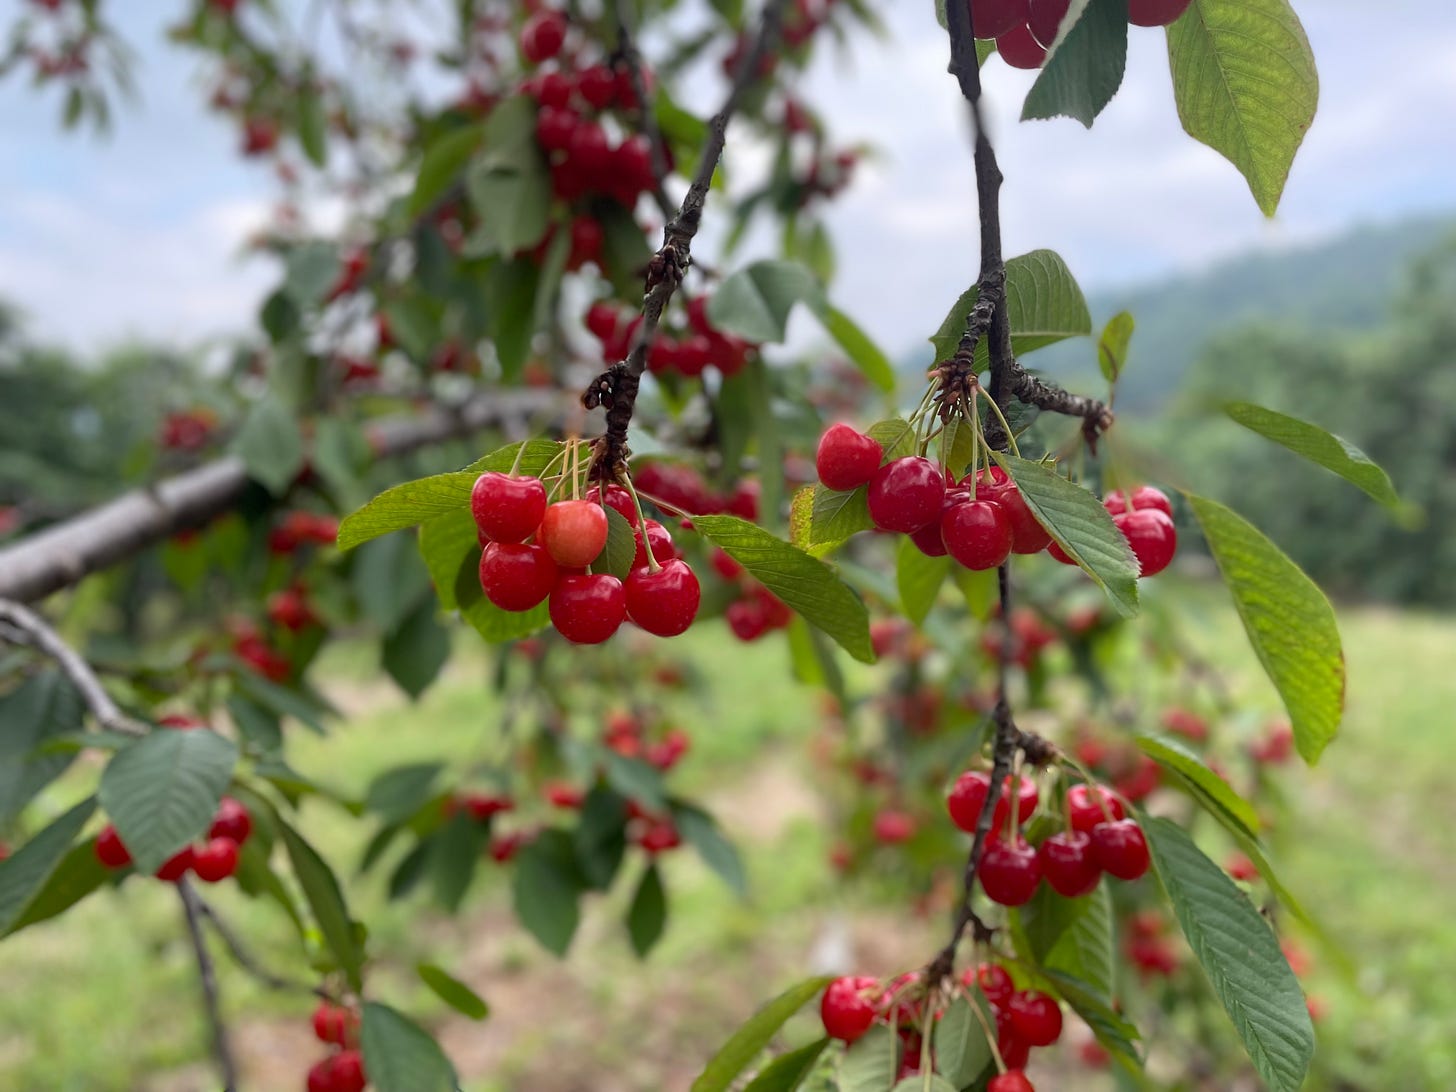 Bright red cherries on the branch with other cherries in the background on a hazy day